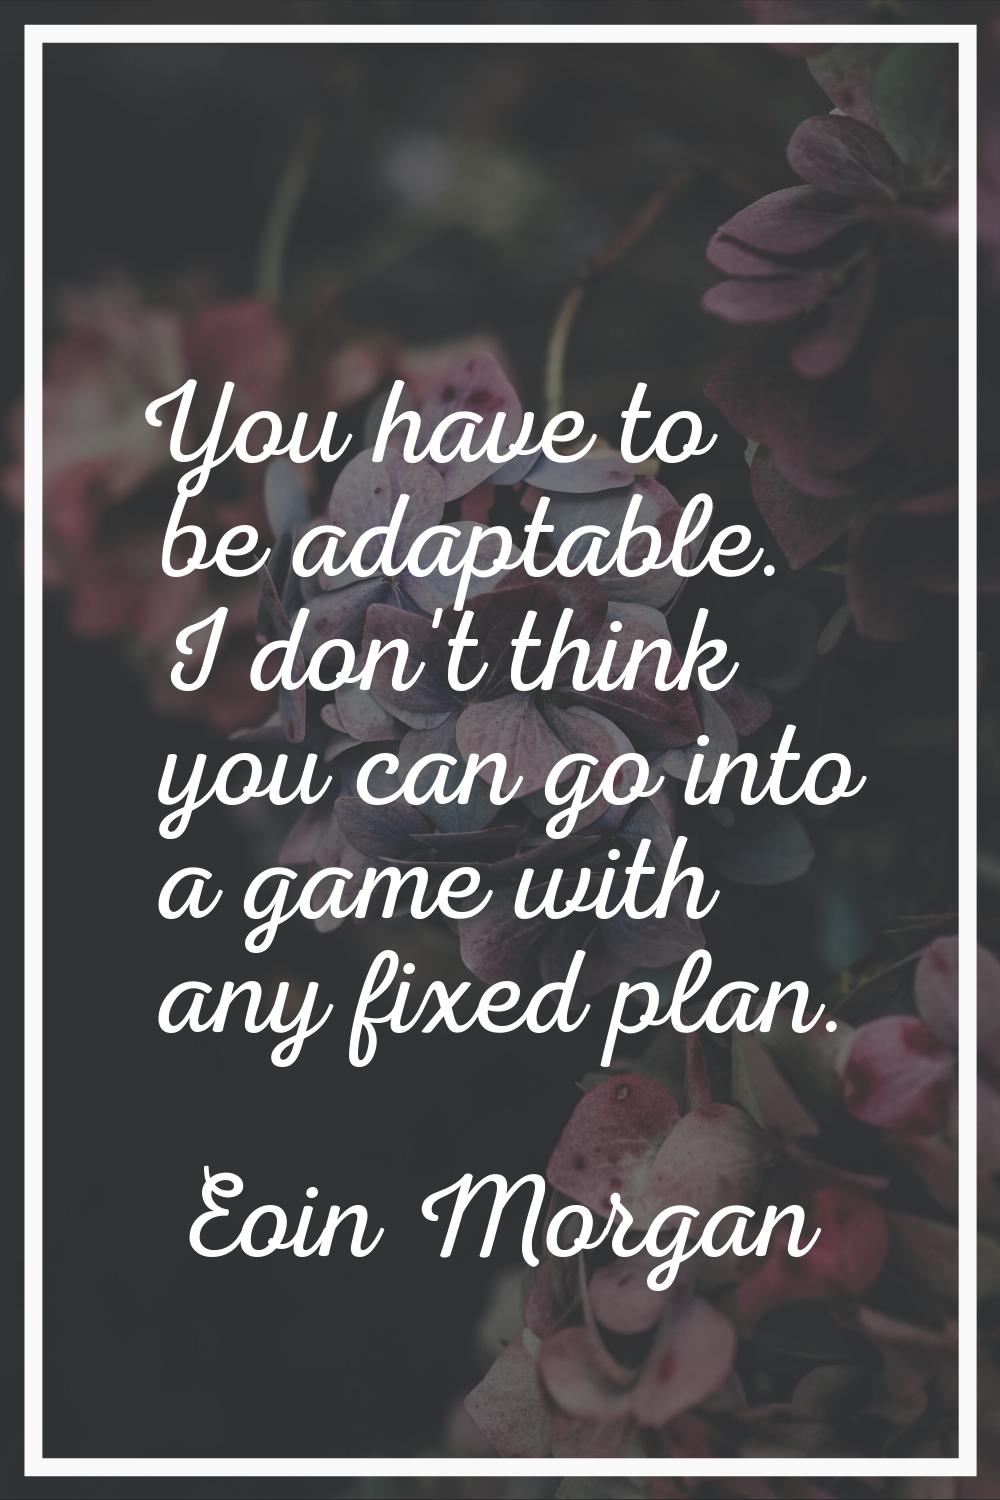 You have to be adaptable. I don't think you can go into a game with any fixed plan.